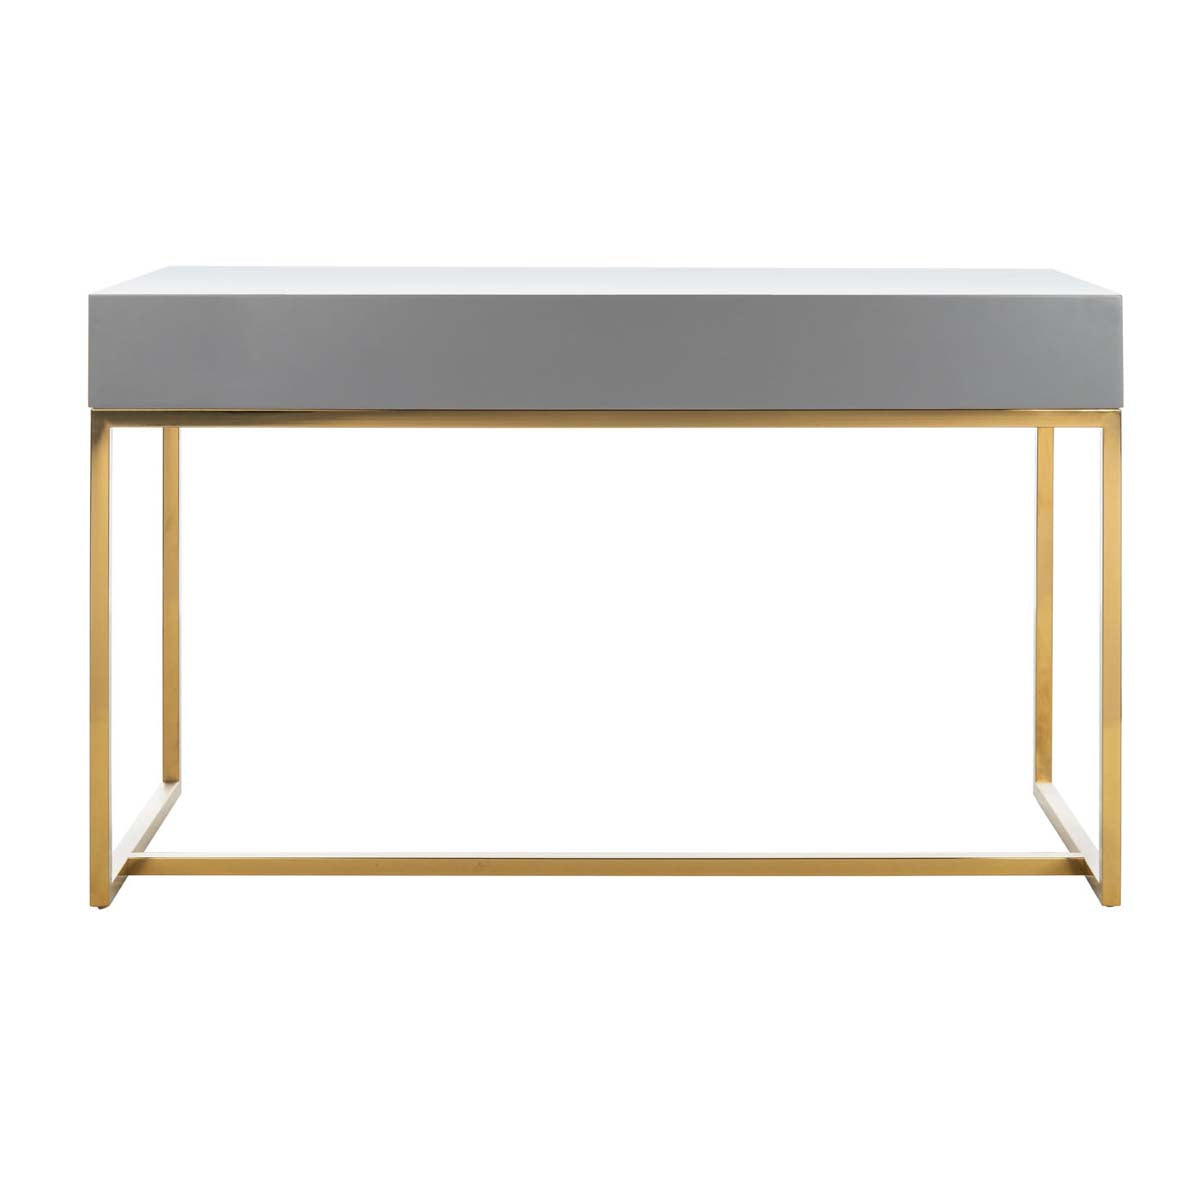 Safavieh Couture Marty Modern Desk - Grey / Gold